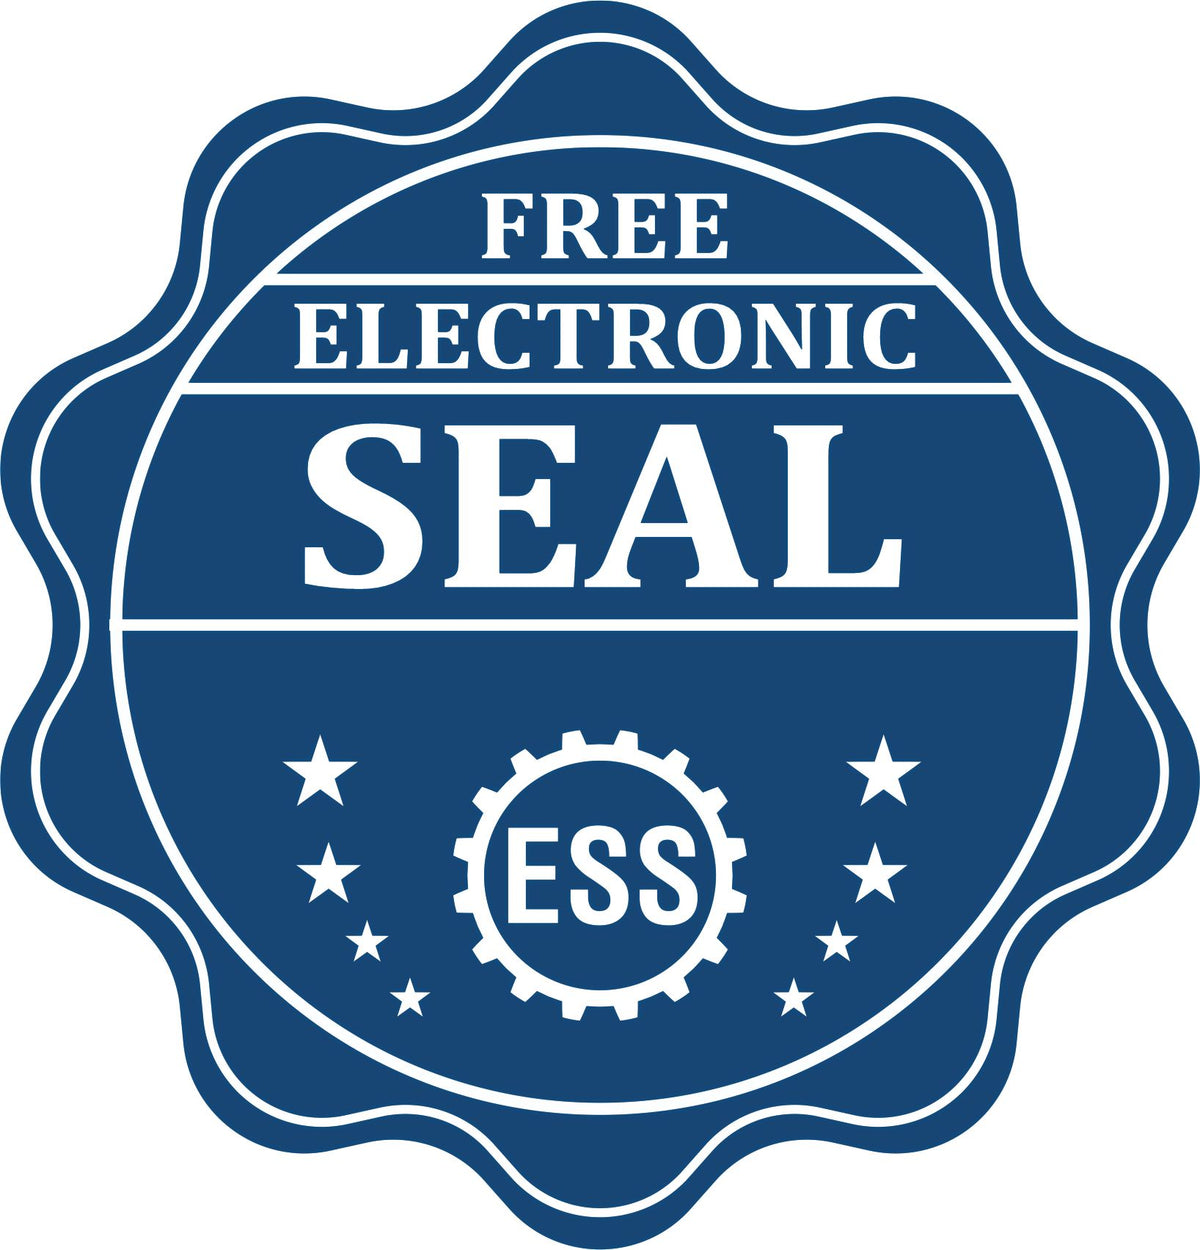 A badge showing a free electronic seal for the Heavy-Duty New Mexico Rectangular Notary Stamp with stars and the ESS gear on the emblem.